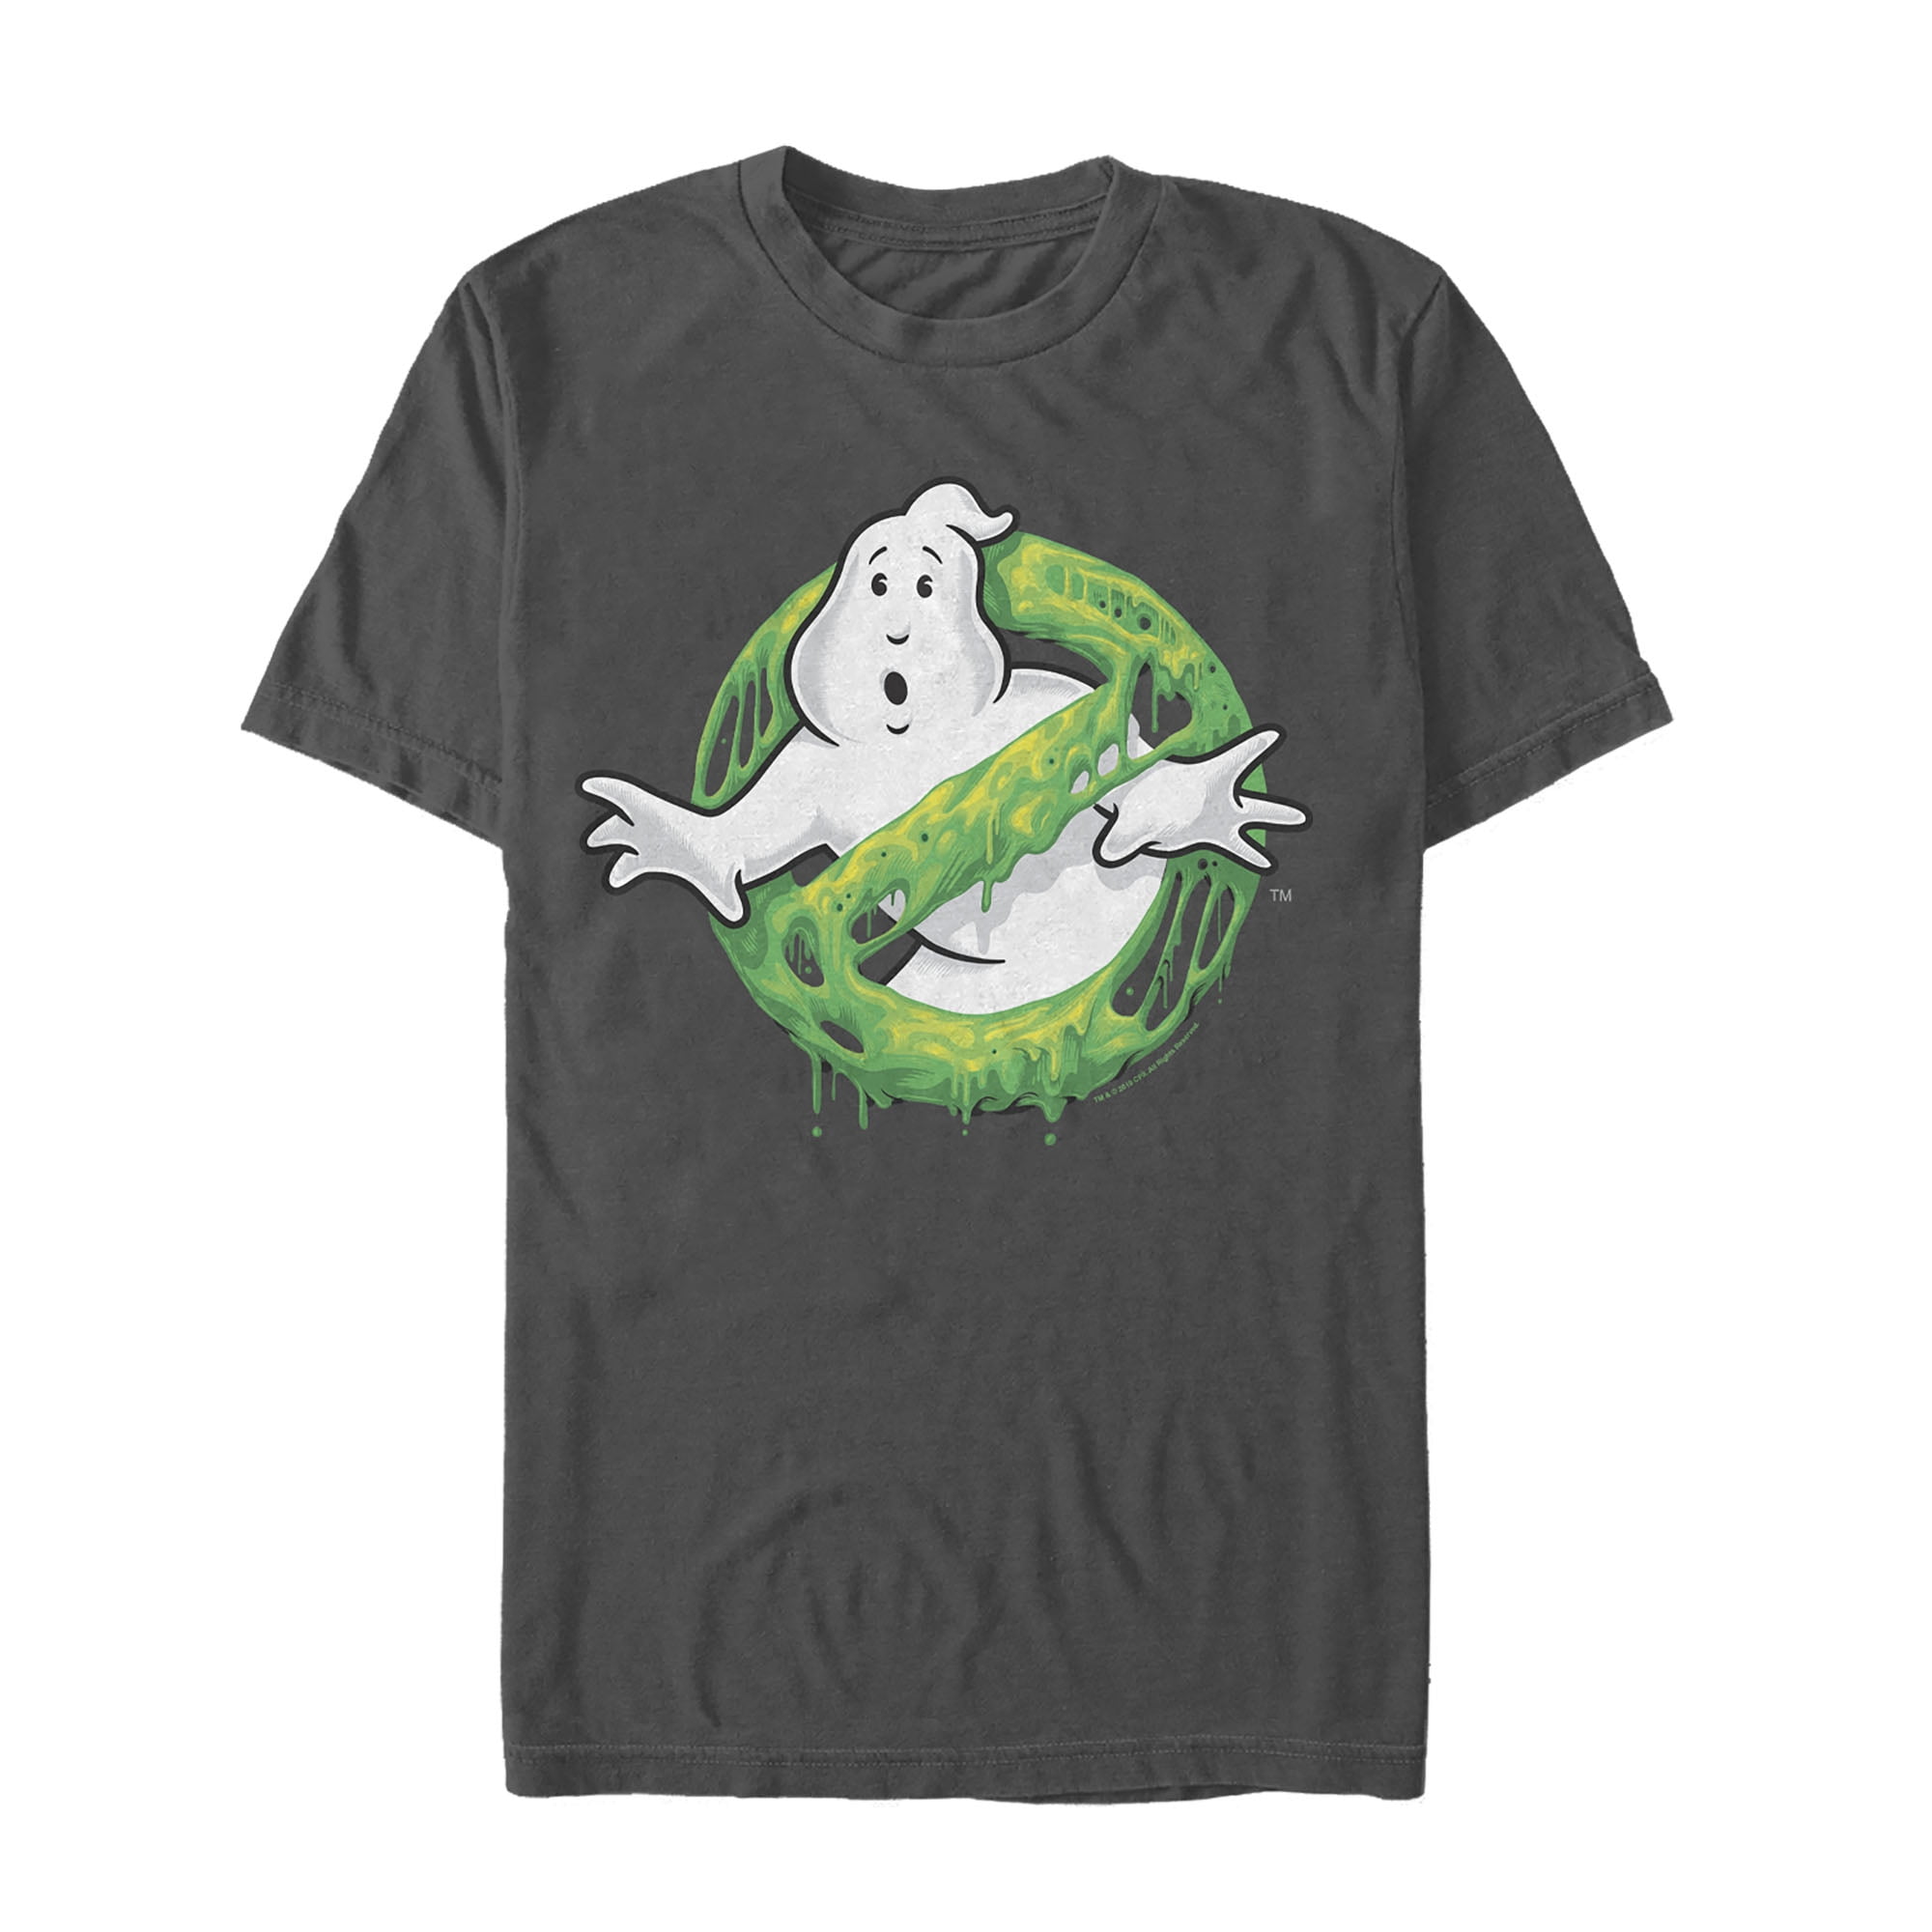 He slimed me Mens T-Shirt Ghostbusters - 1984